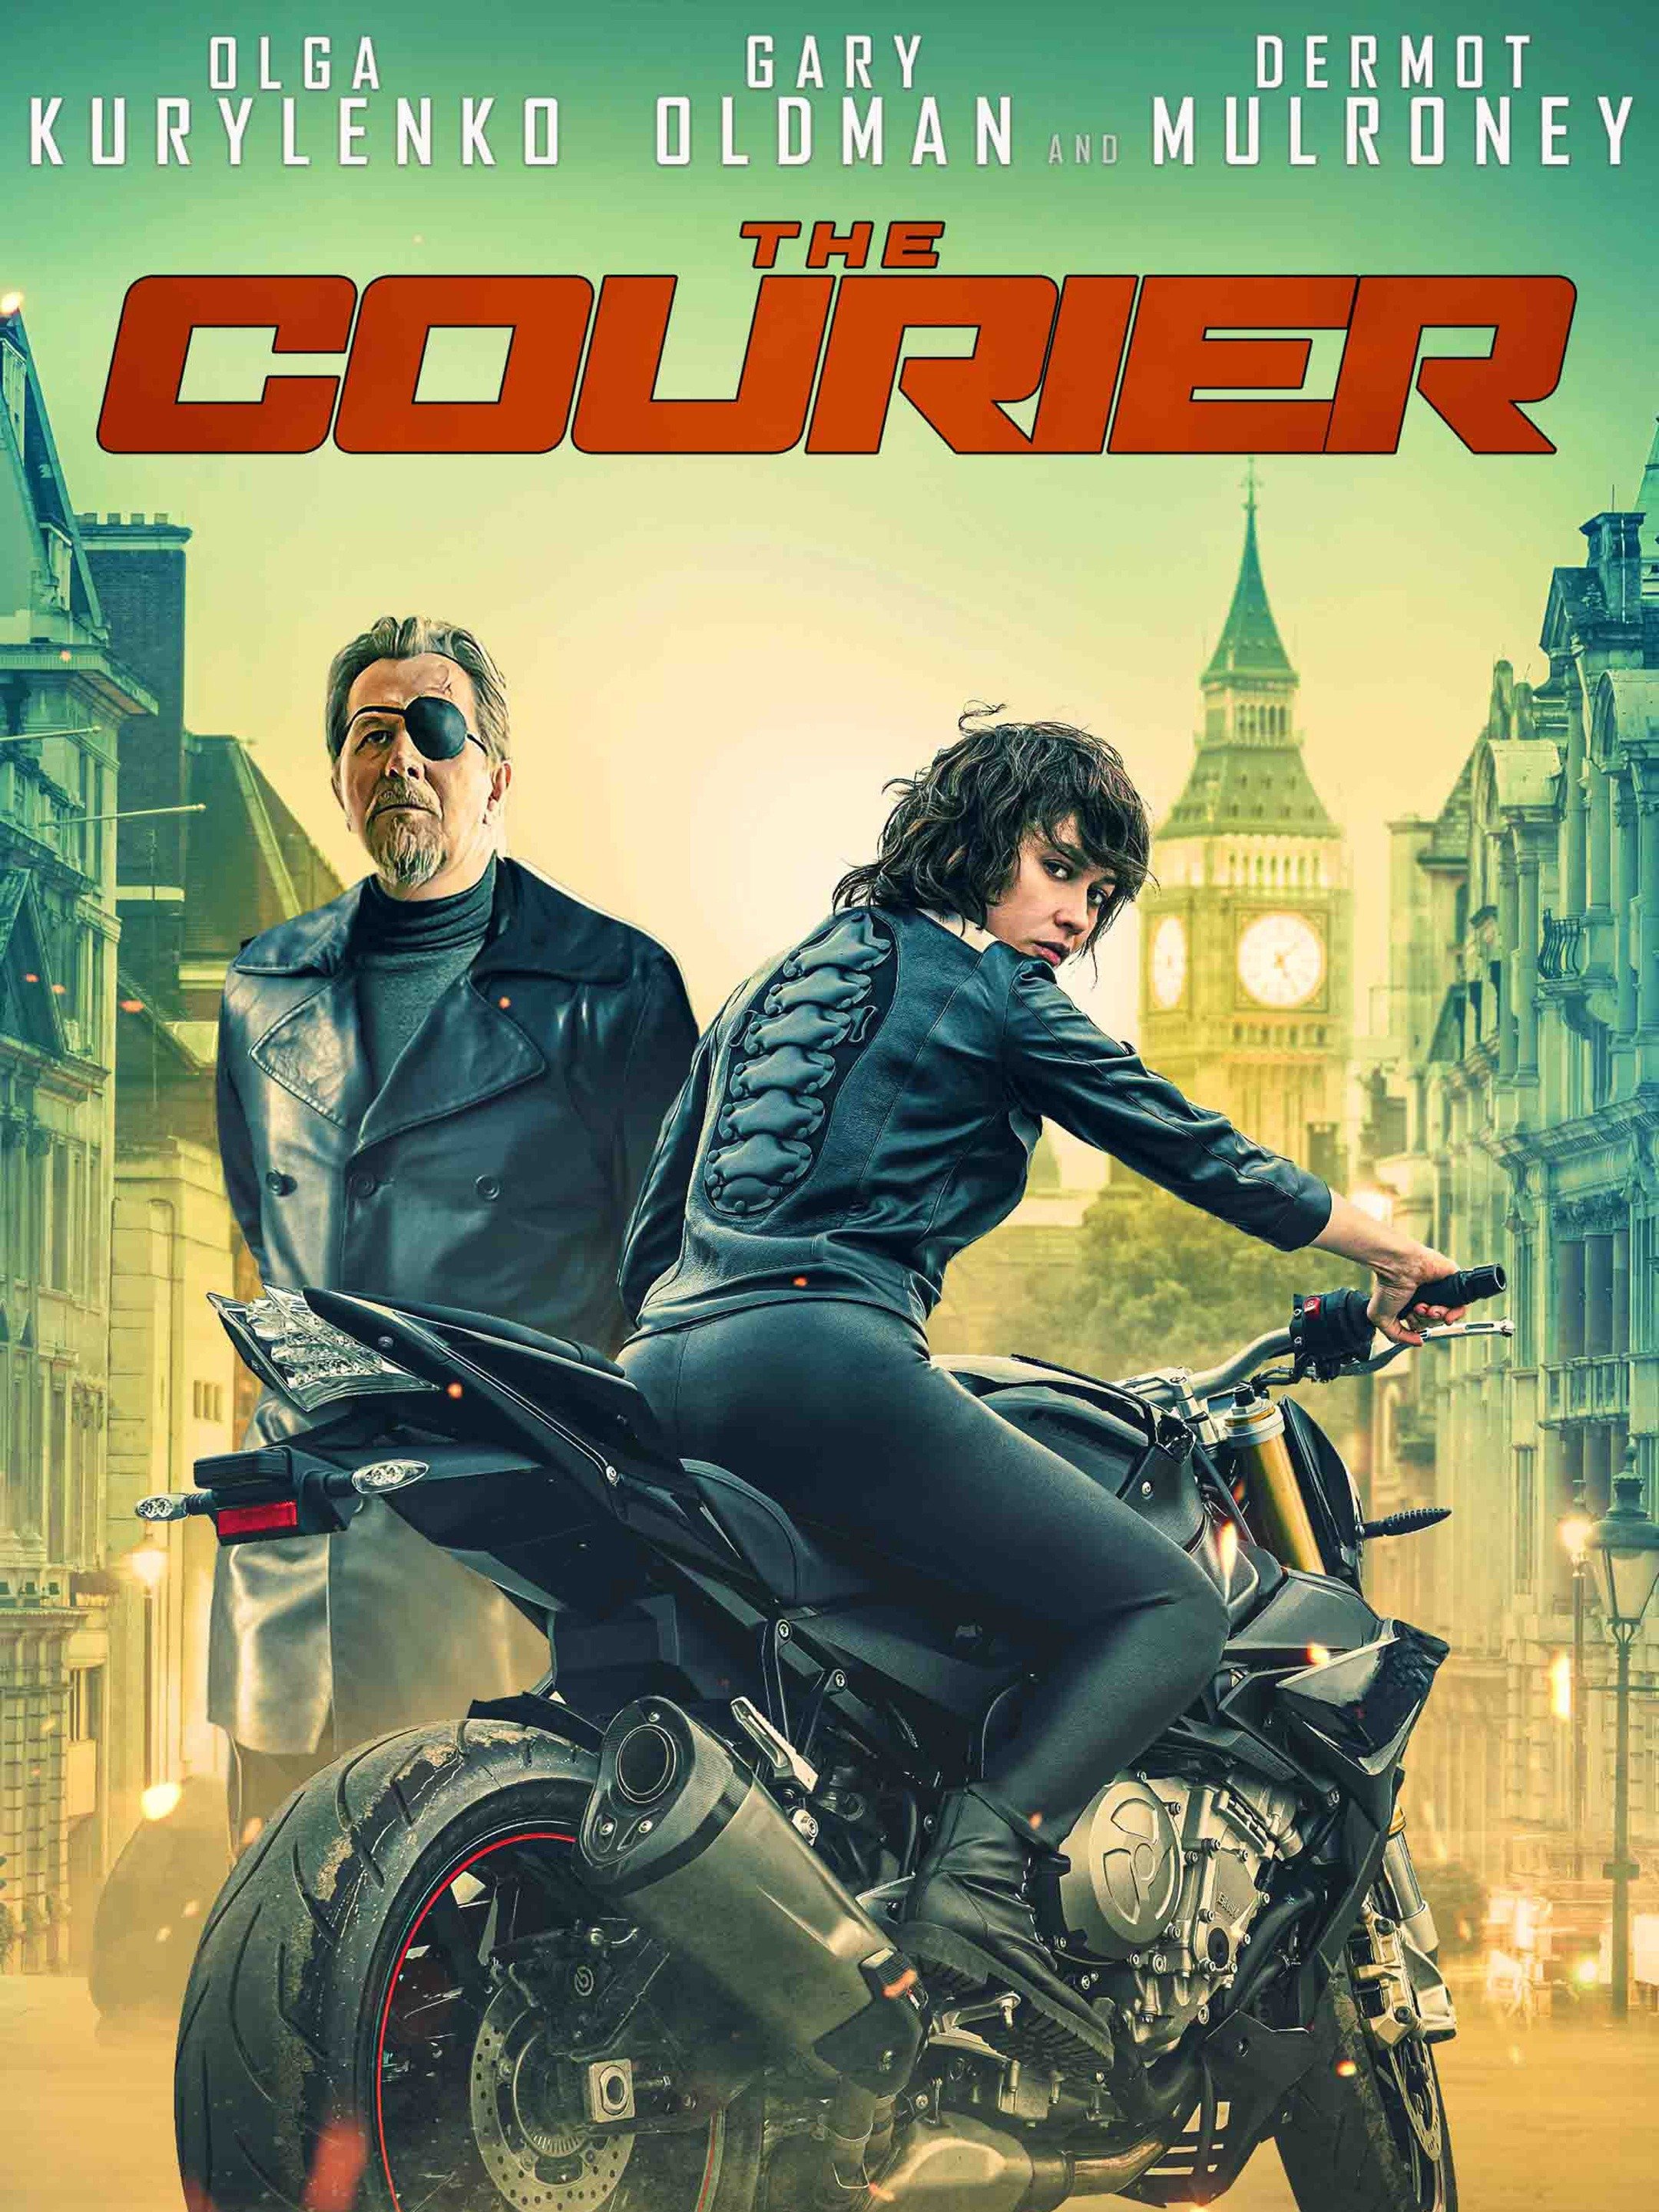 The Courier Trailer 1 Trailers & Videos Rotten Tomatoes